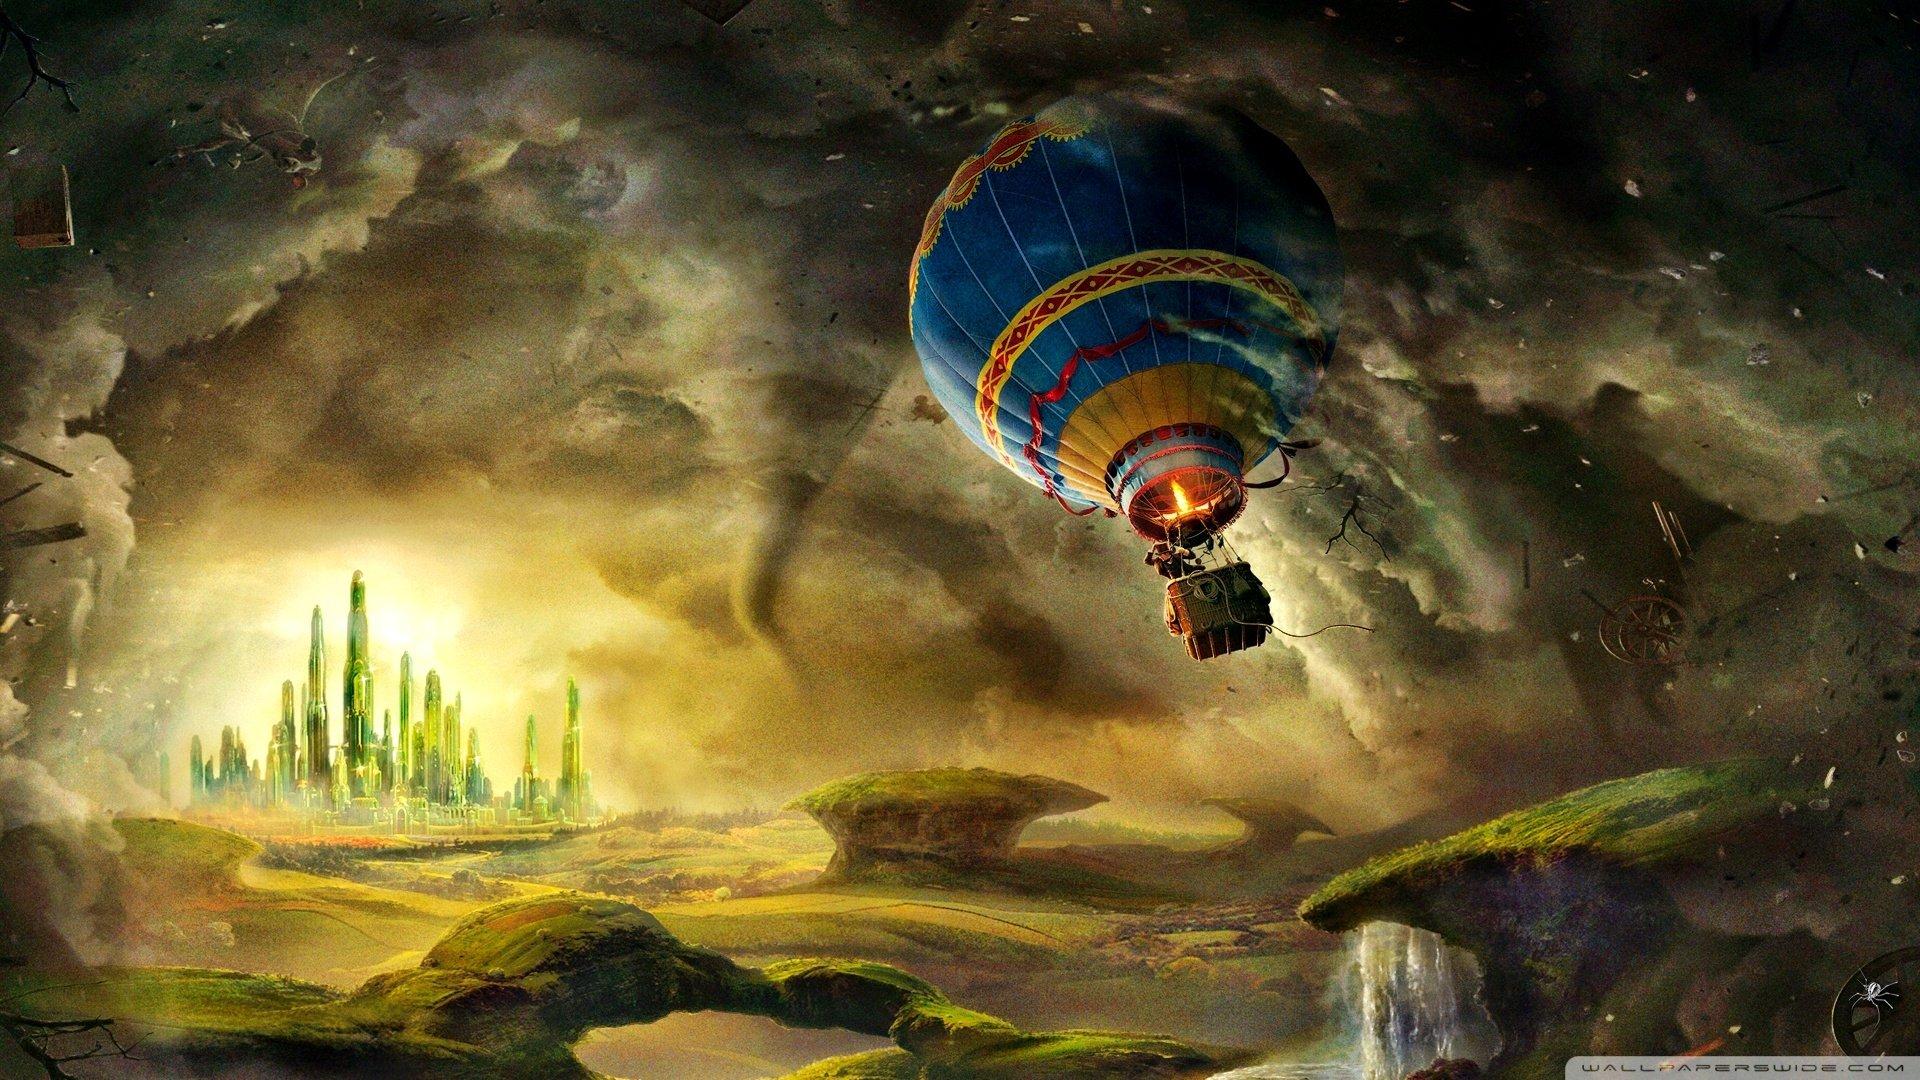 Oz the Great and Powerful Wallpaper 6 X 1080